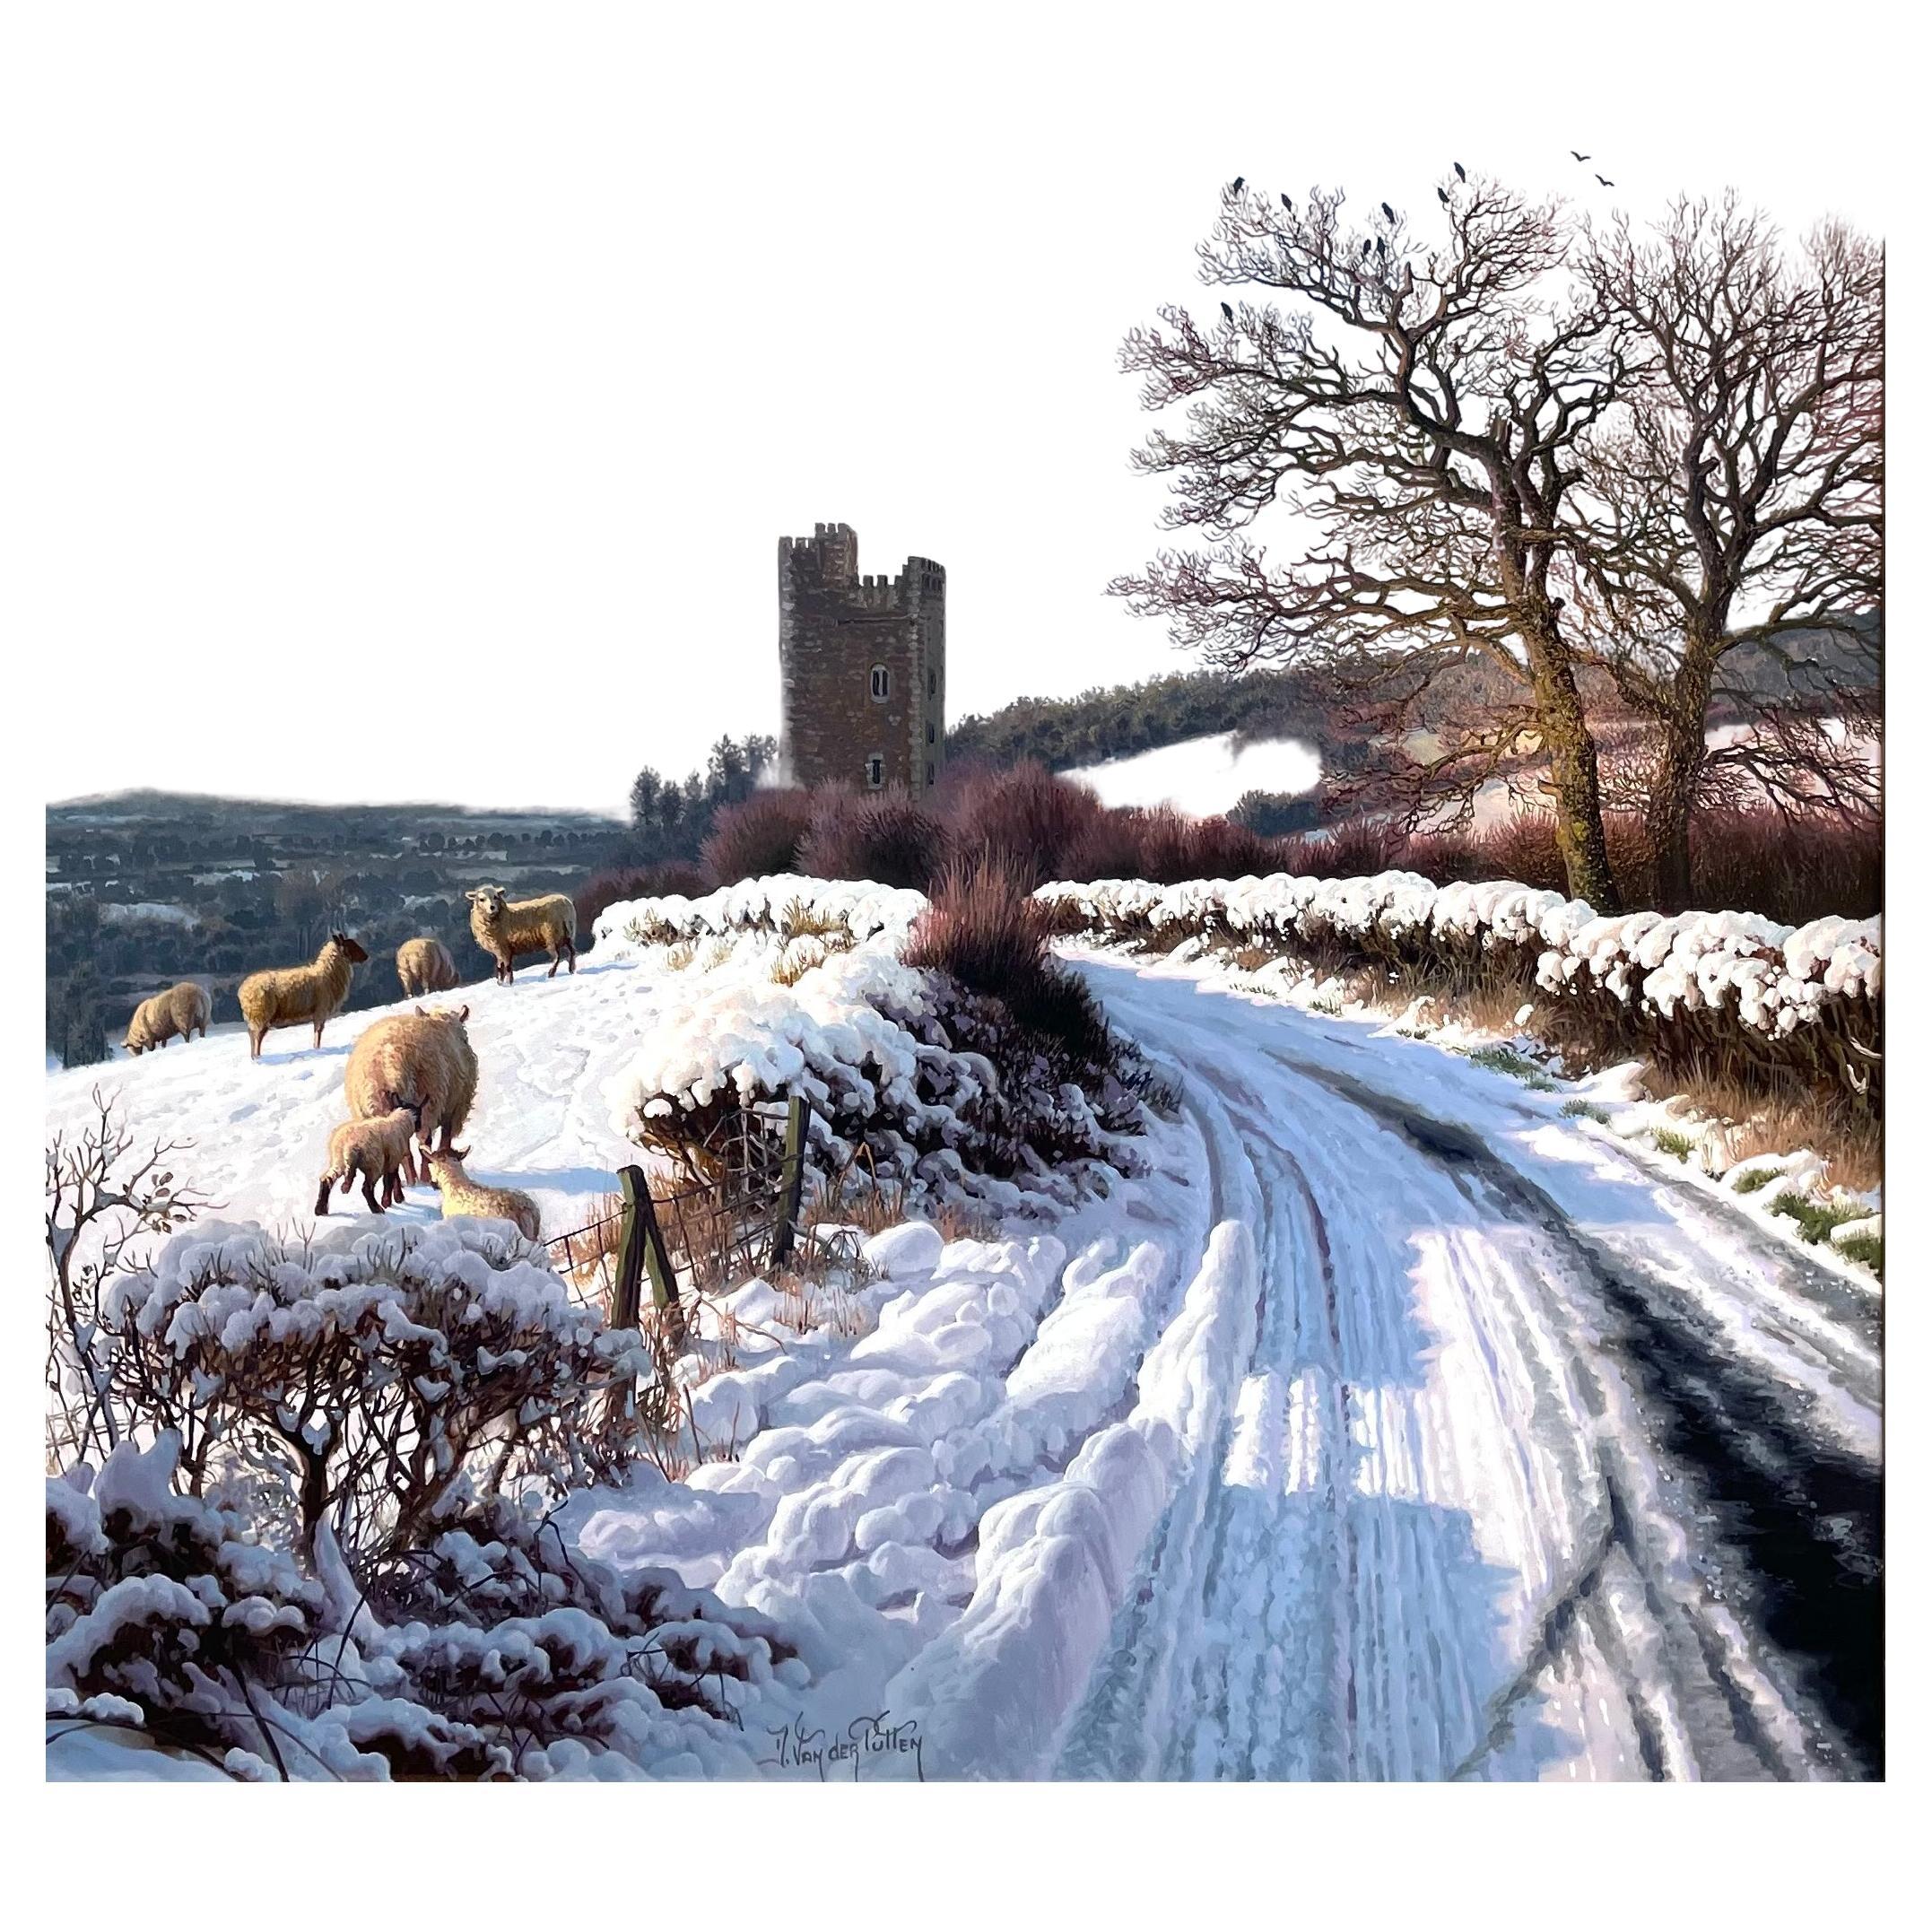 Superb painting by Daniel Van der Putten, depicting a wonderful rural snow scene, a snow-covered dirt road with a herd of sheep on the left and a view of Glenquin Castle Killeedy County Limerick Ireland, in the distance. 

Oil on board complete with